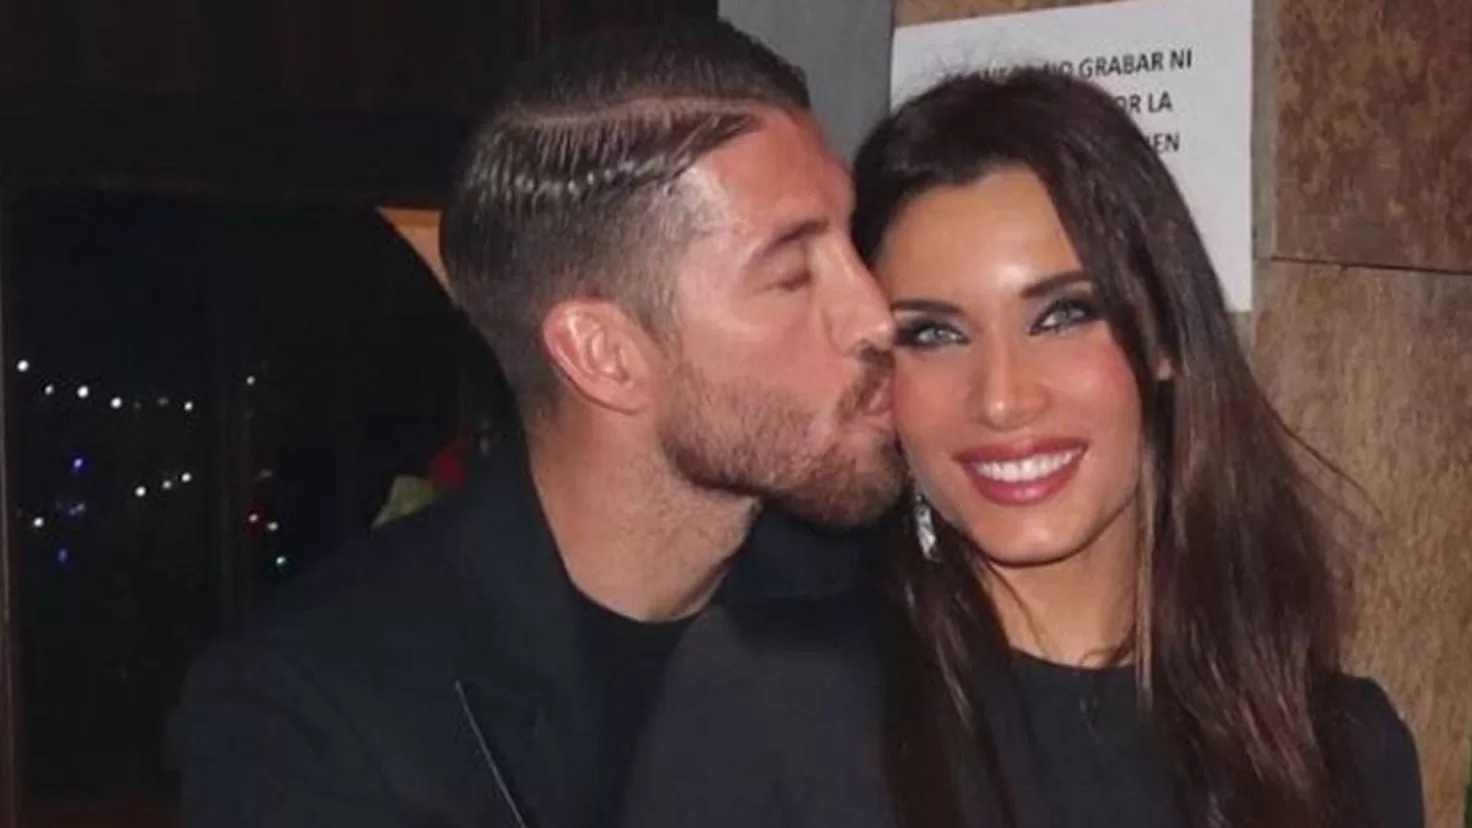 The relationship between Sergio Ramos and Pilar Rubio, in the eye of the hurricane
